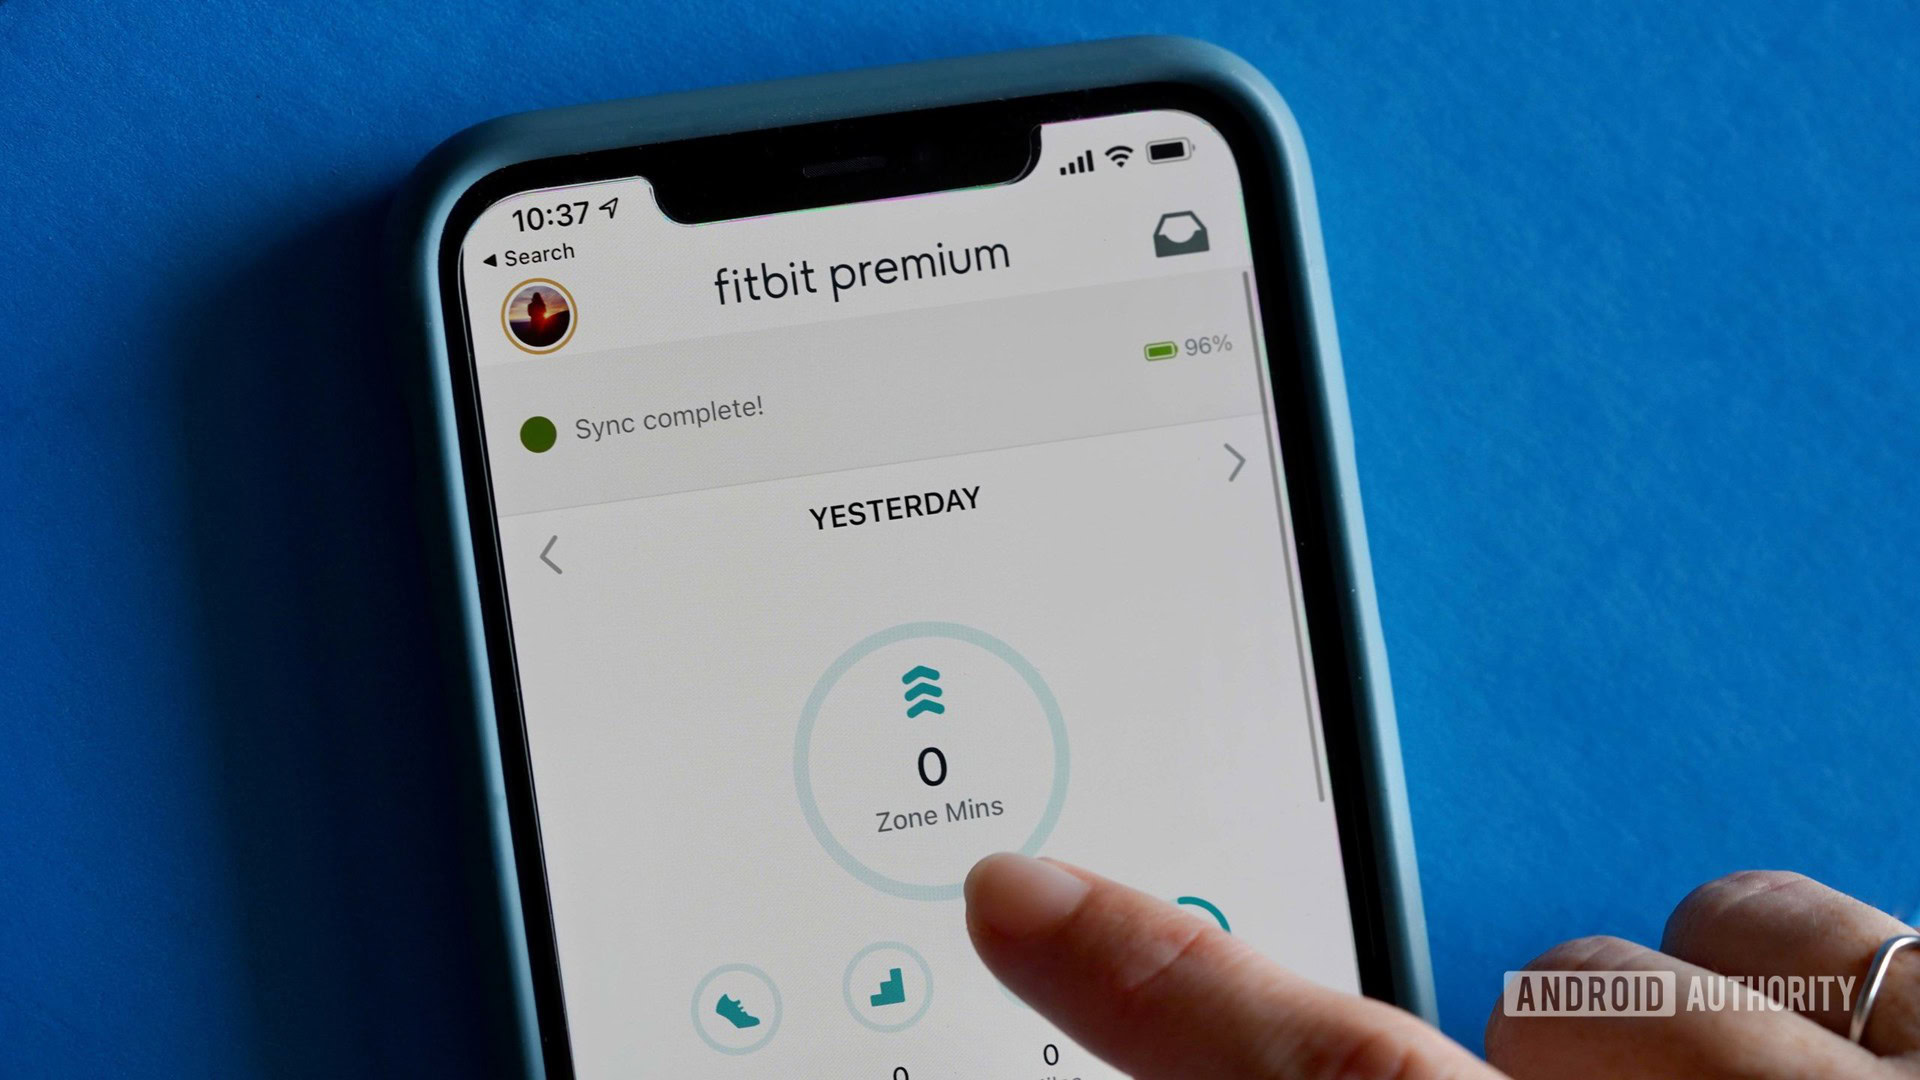 A Fitbit user Syncs their device by pulling down on the Today tab in the Fitbit app.